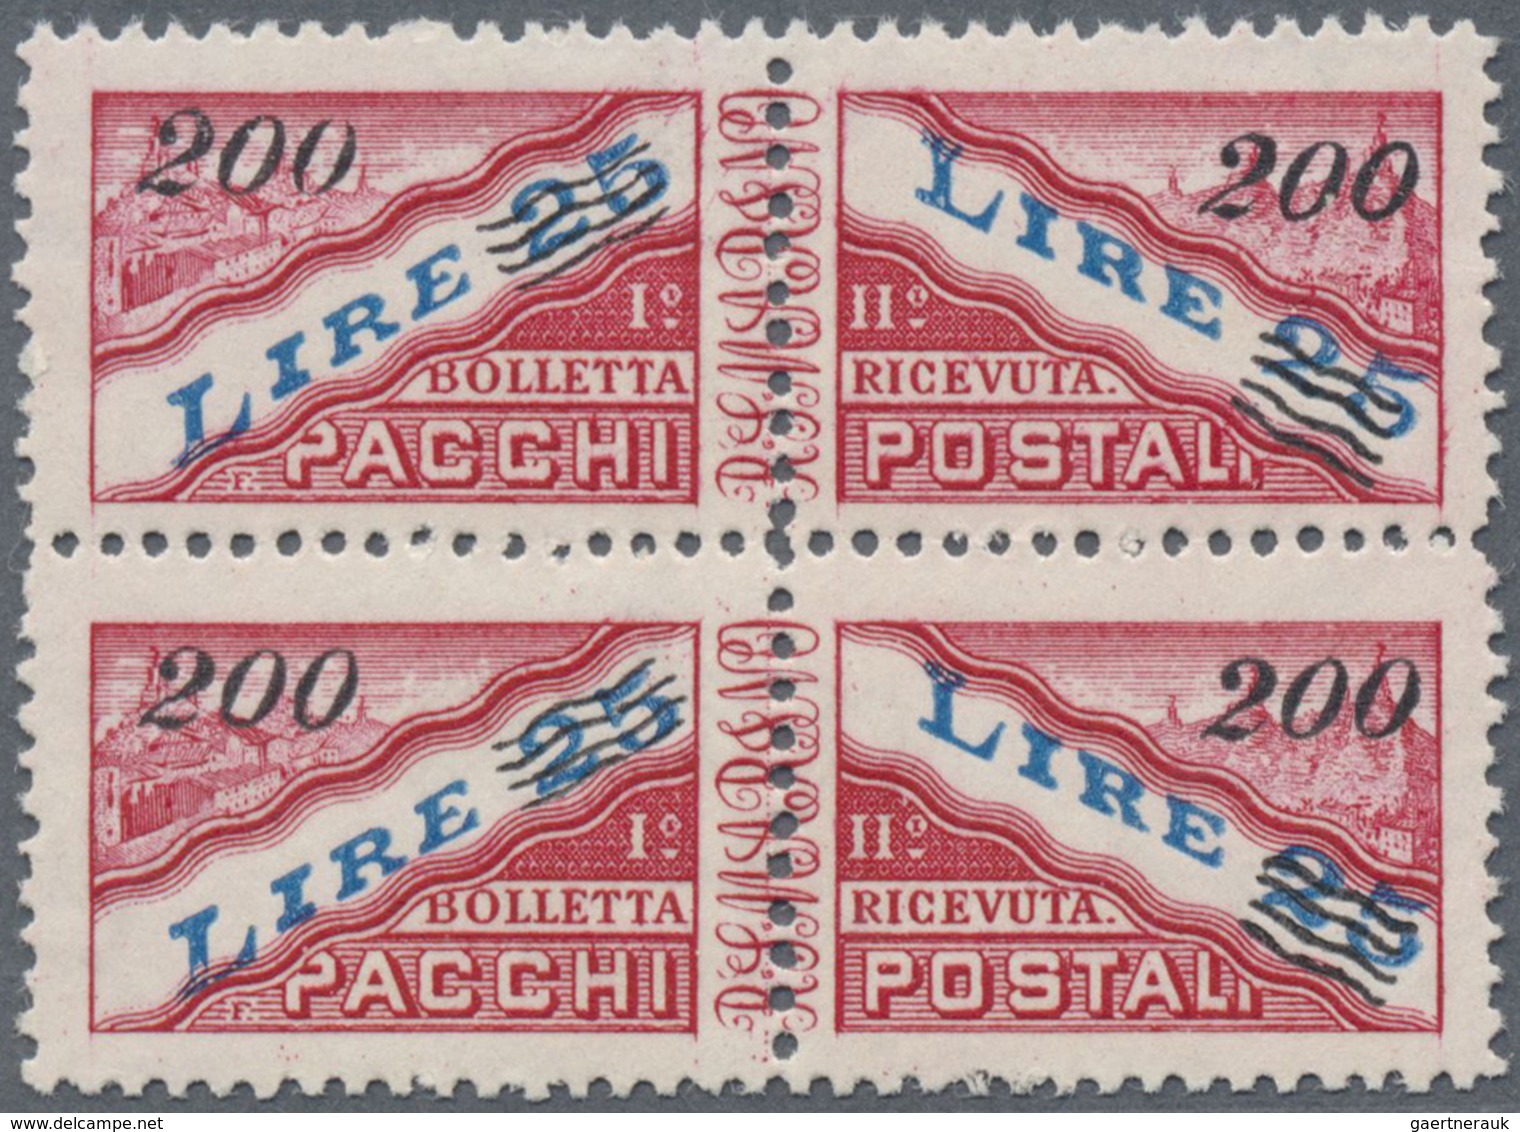 **/ San Marino - Paketmarken: 1950, Package Stamps With New Value Overprint 200 L On 25 L. In The Vertic - Paketmarken